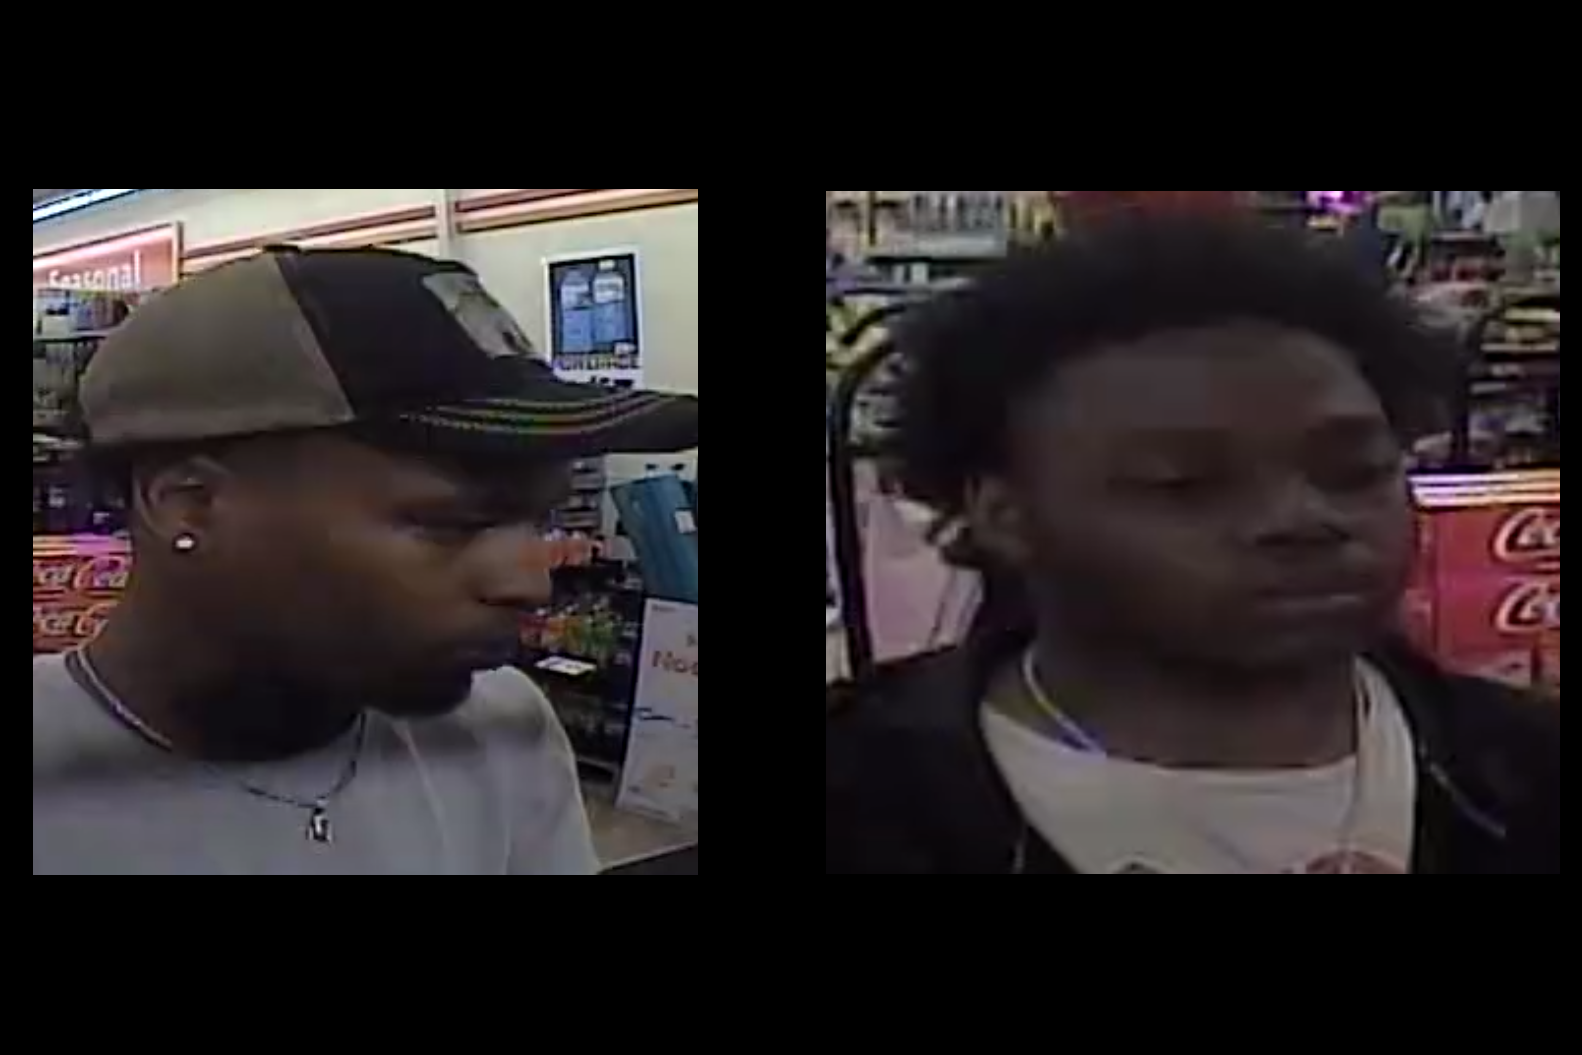 Detectives asking for help identifying robbery suspects